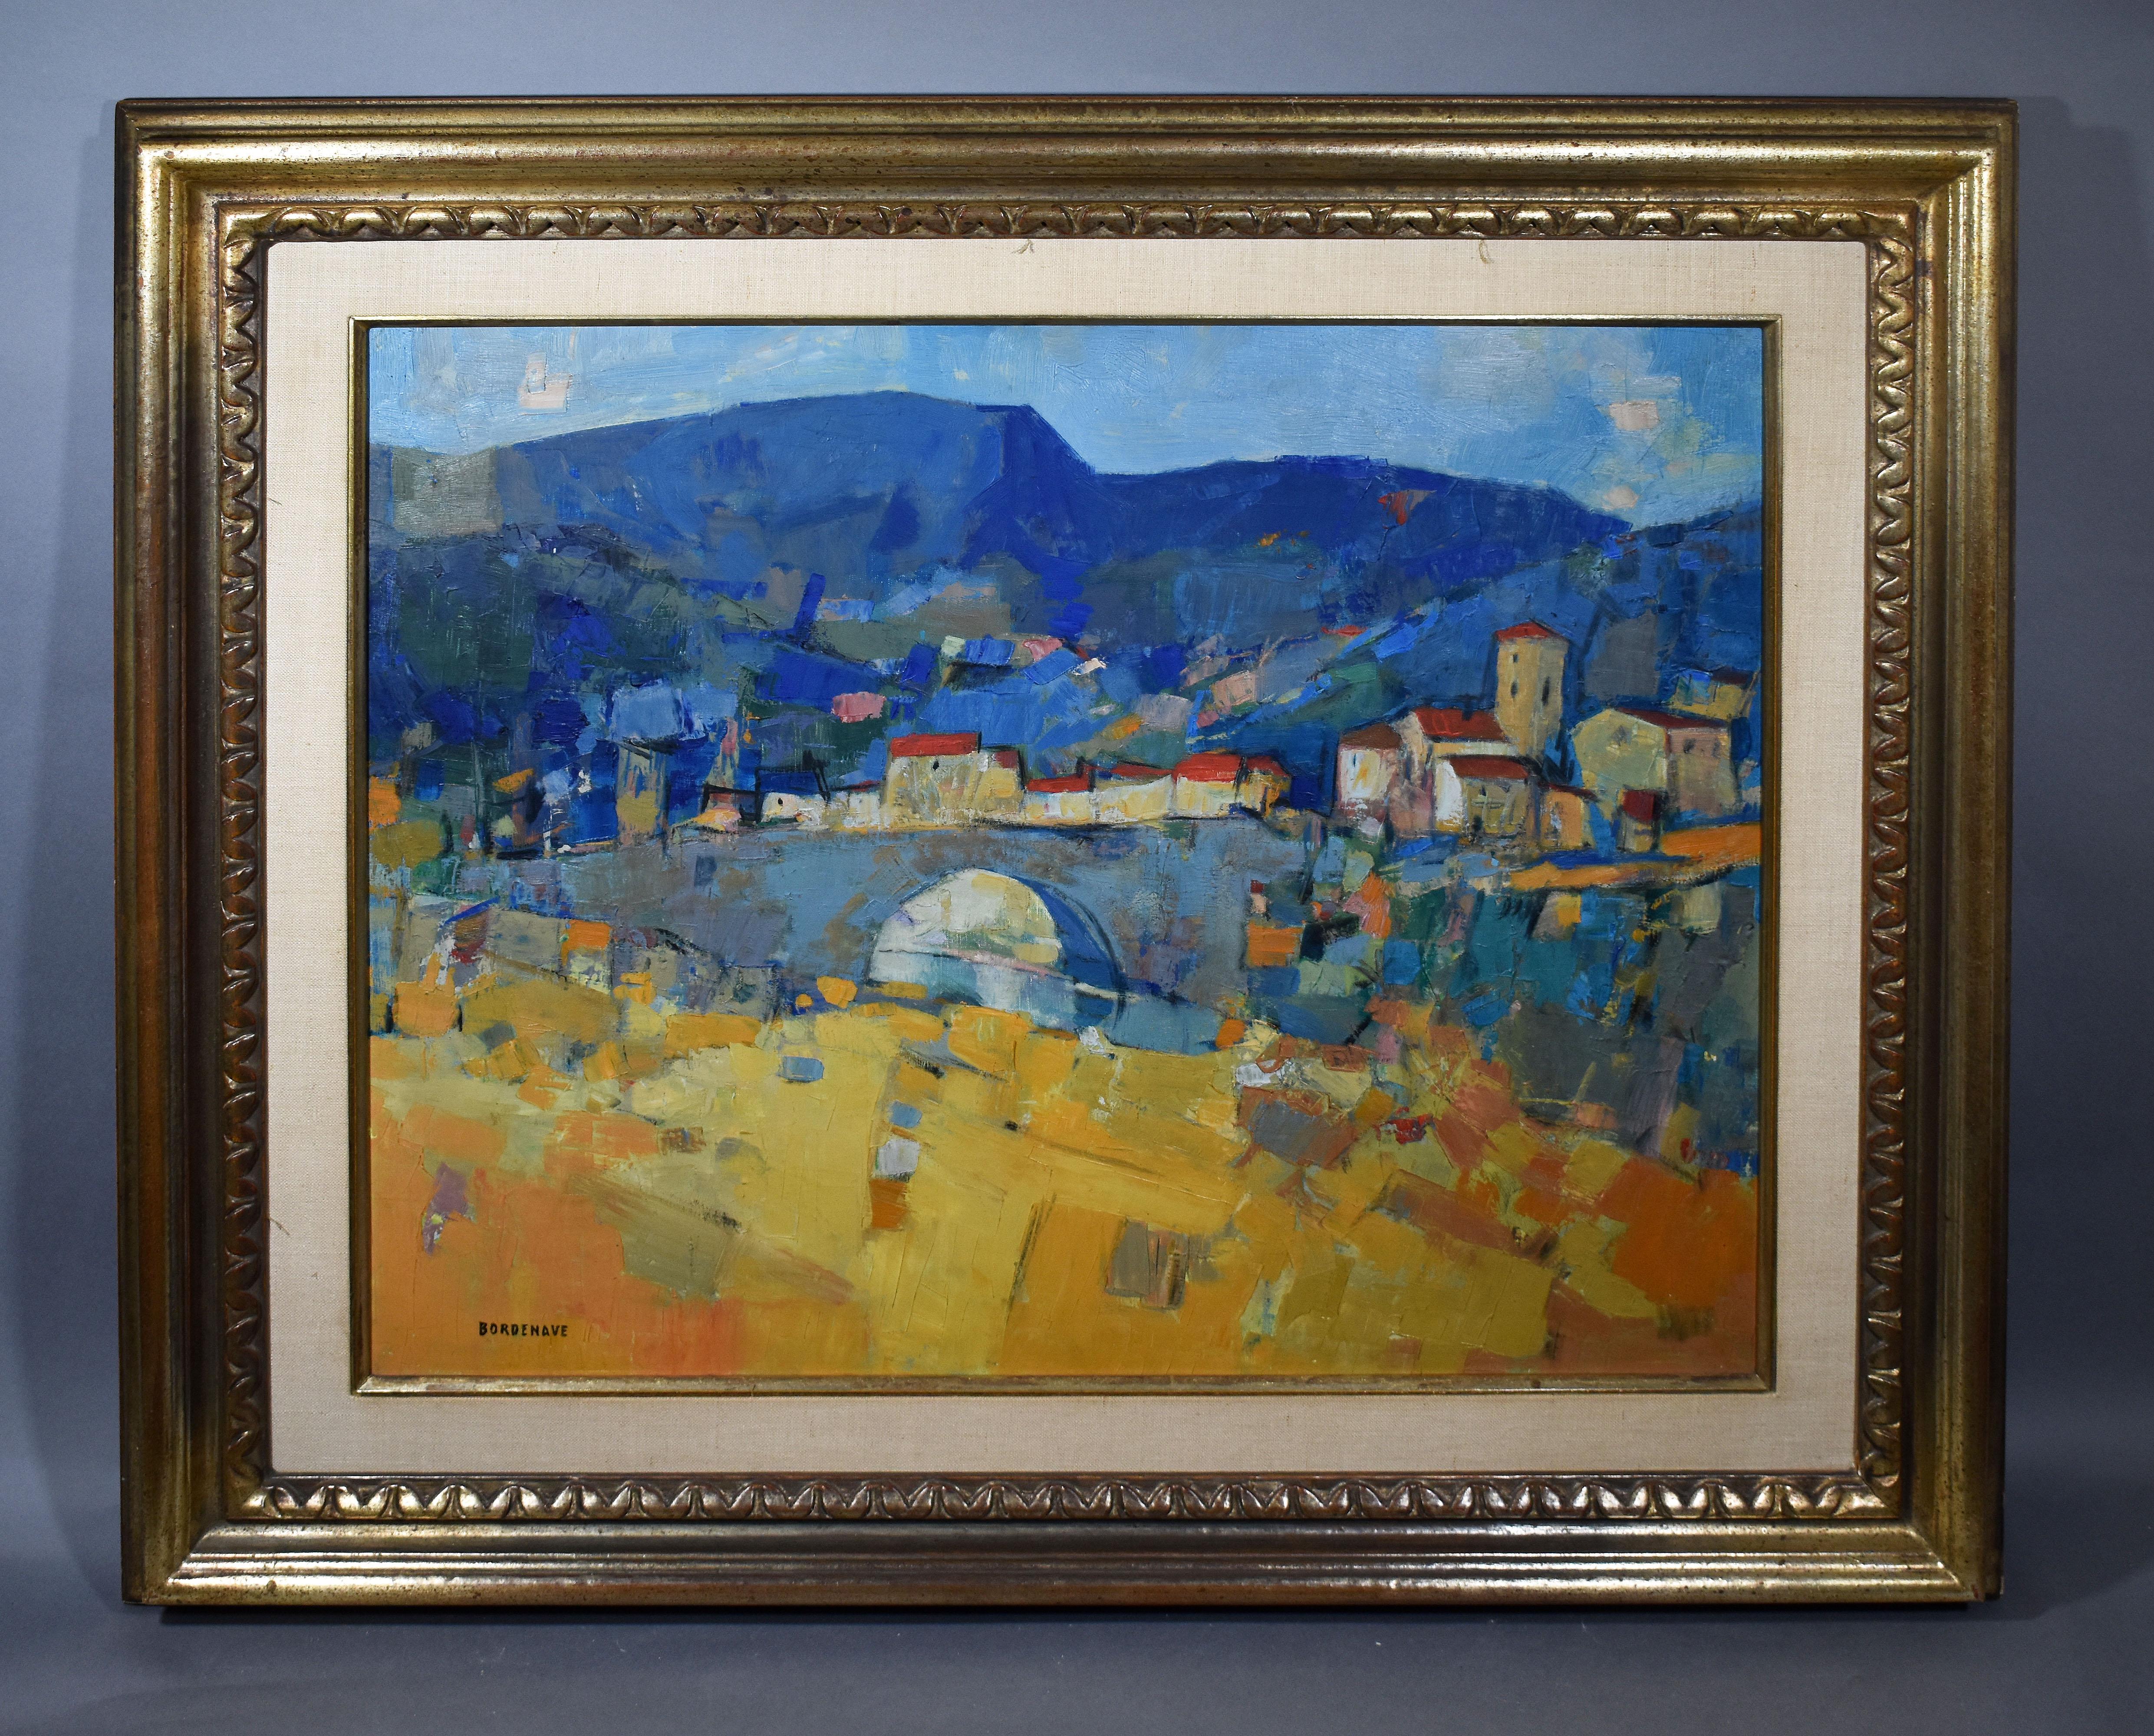 Modernist abstract landscape painting by Pierre Bordenave  (1900 - 1970).  Oil on canvas, circa 1945.  Signed.  Displayed in a modernist frame.  Image size, 28